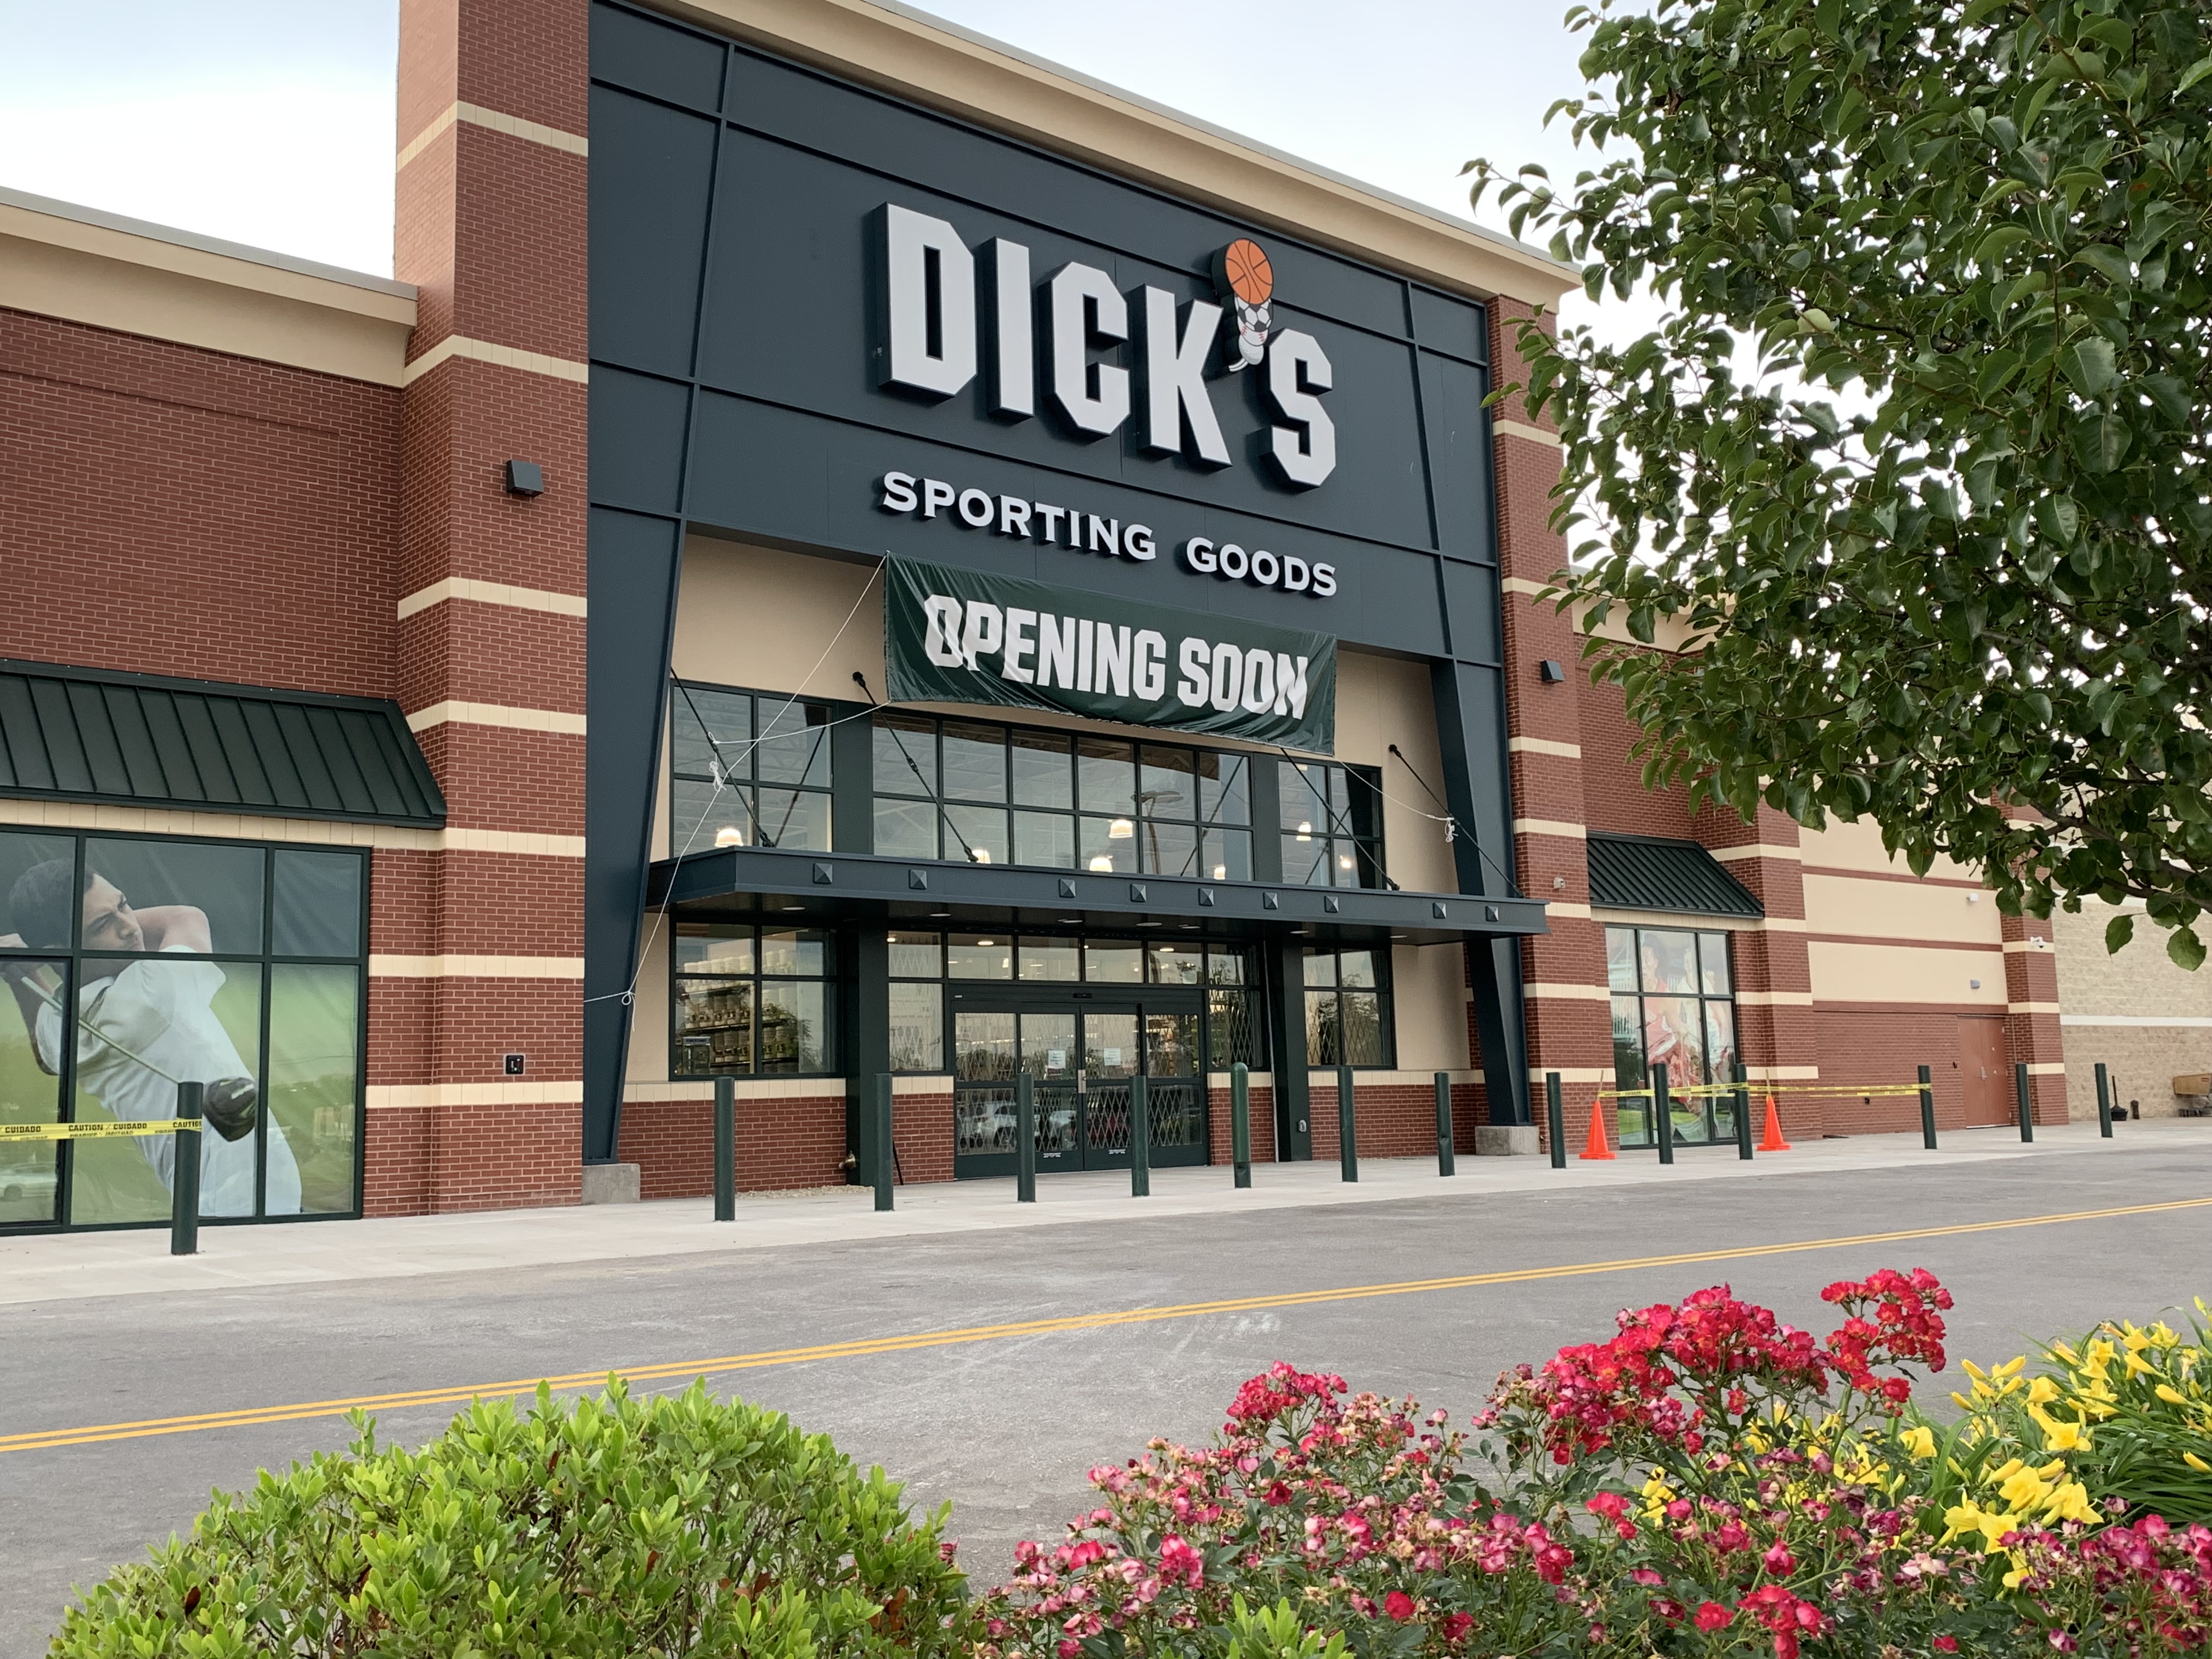 Dick's Sporting Goods sets opening day for new store in Clay (see